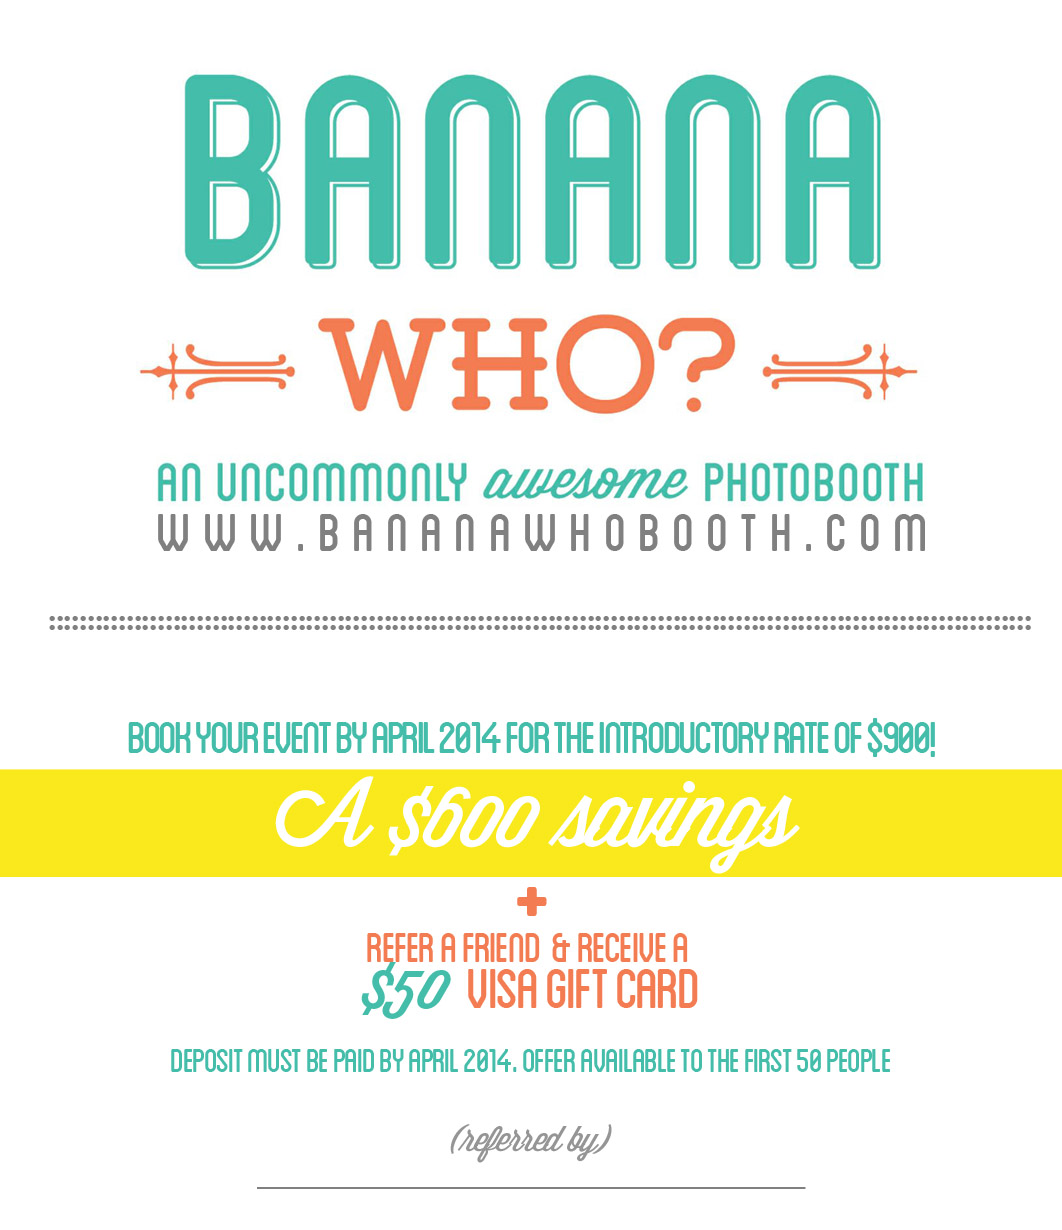 Kansas City photo booths, Banana Who Booth, creative backdrops, introductory rate, Photobooth specials